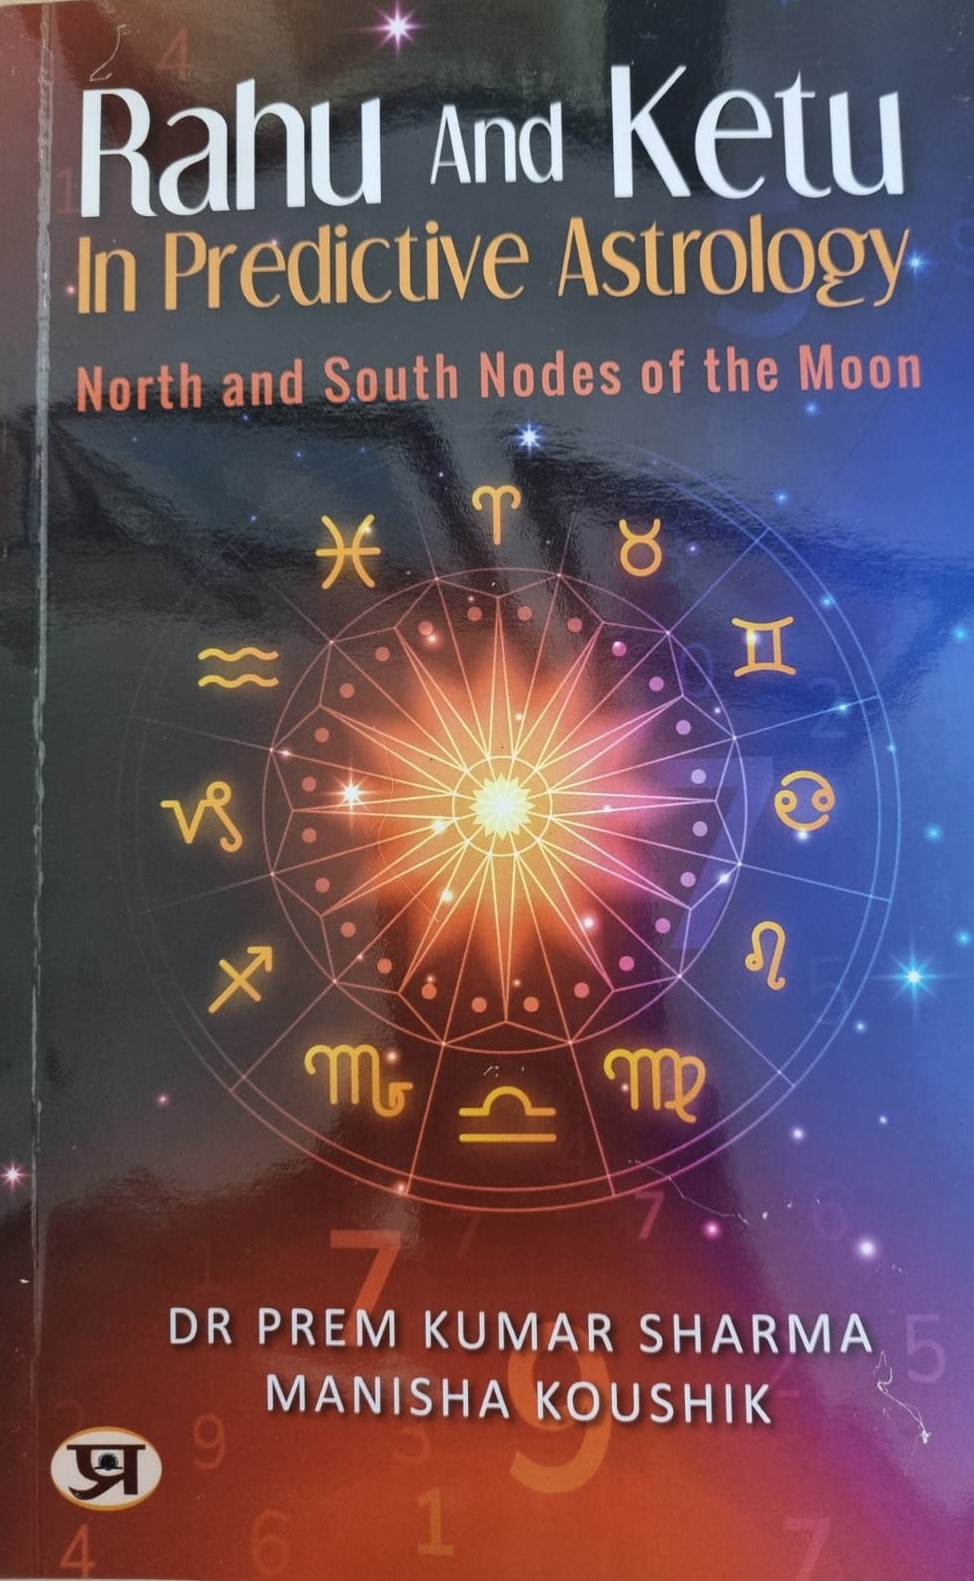 Rahu and Ketu in Predictive Astrology North and South Nodes of the Moon